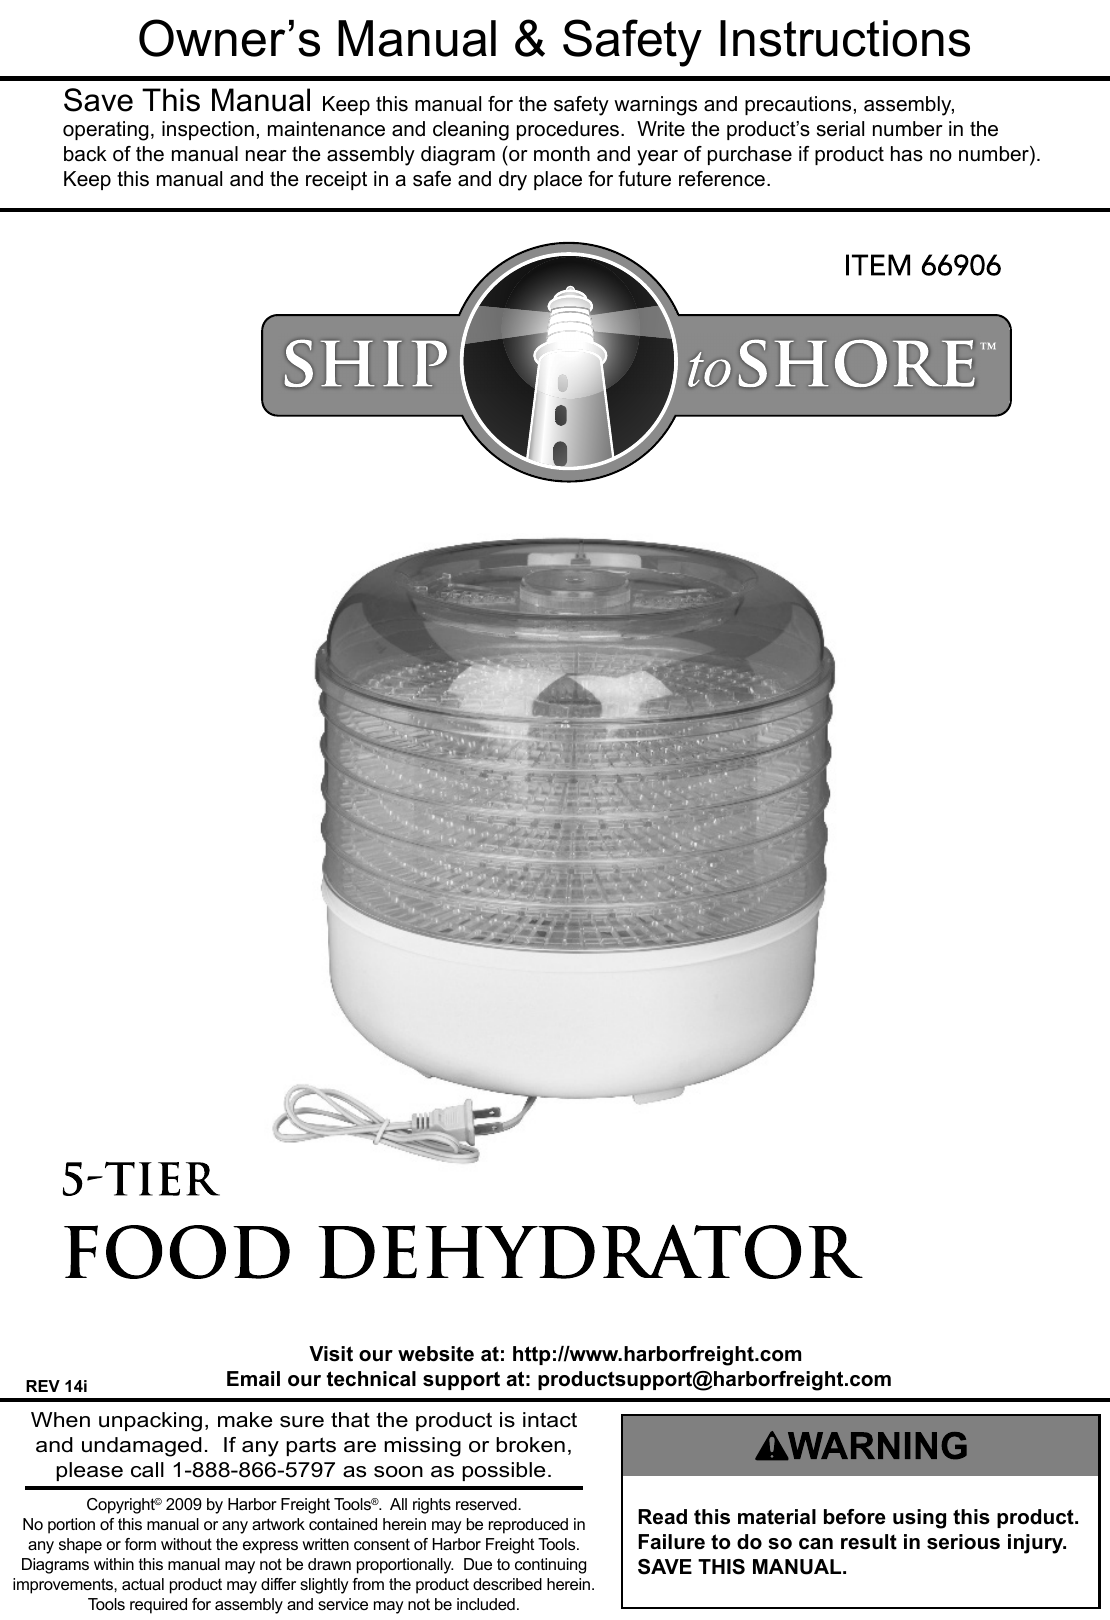 Page 1 of 8 - Harbor-Freight Harbor-Freight-5-Tier-Food-Dehydrator-Product-Manual-  Harbor-freight-5-tier-food-dehydrator-product-manual